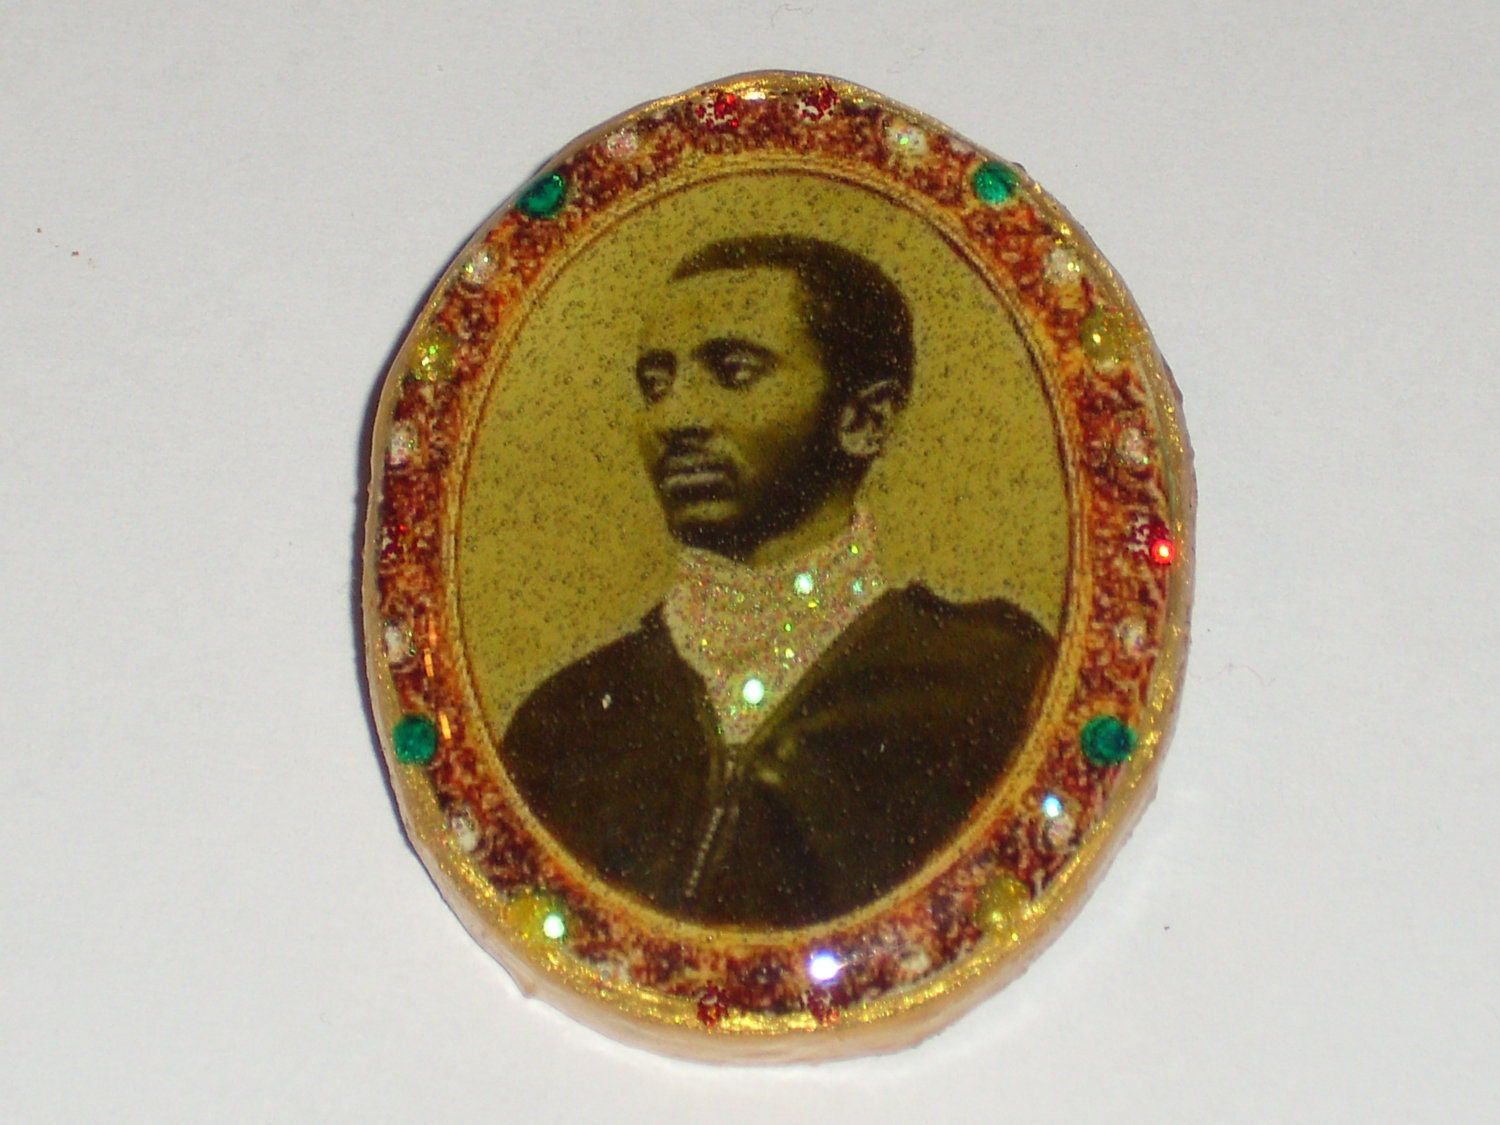 Small Royal Touch Round badge of Haile Selassie I of Ethiopia